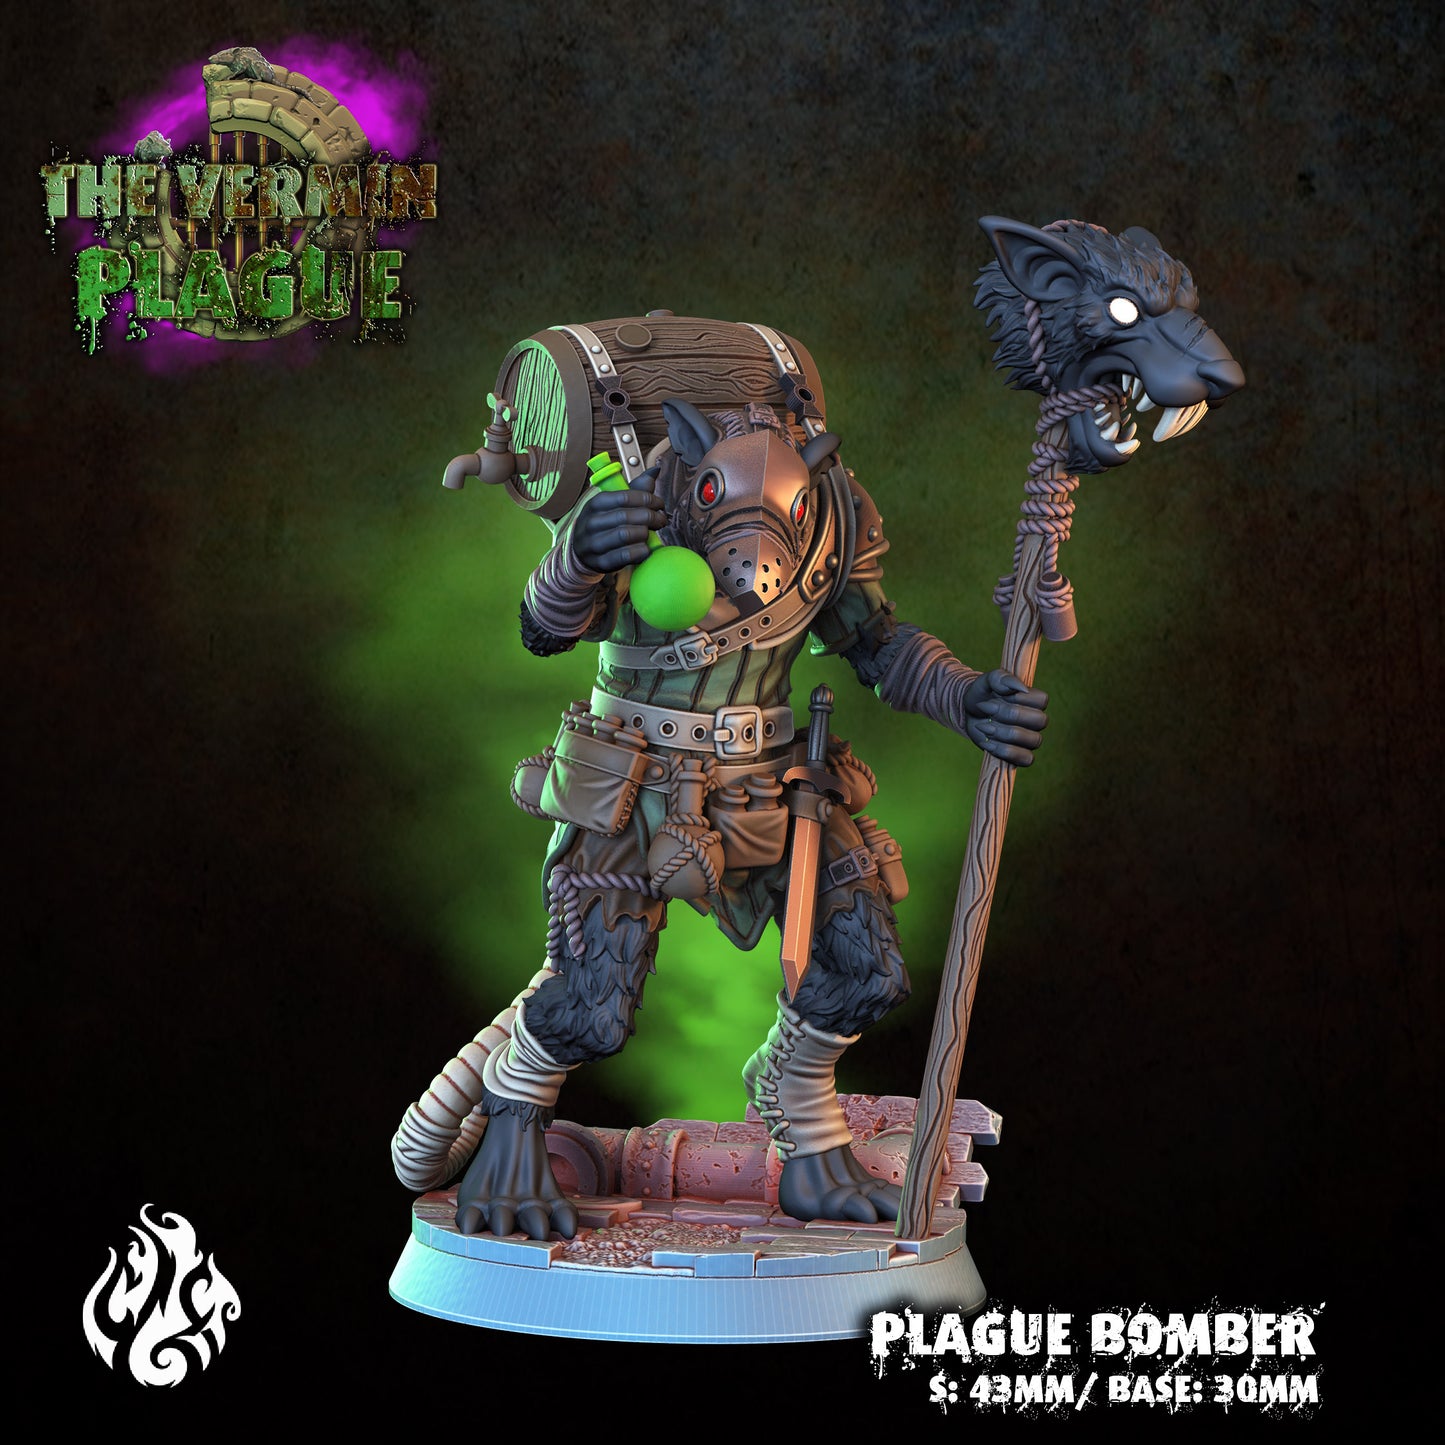 Plague Bomber The Vermin Plague Series from Crippled God Foundry - Table-top gaming mini and collectable for painting.